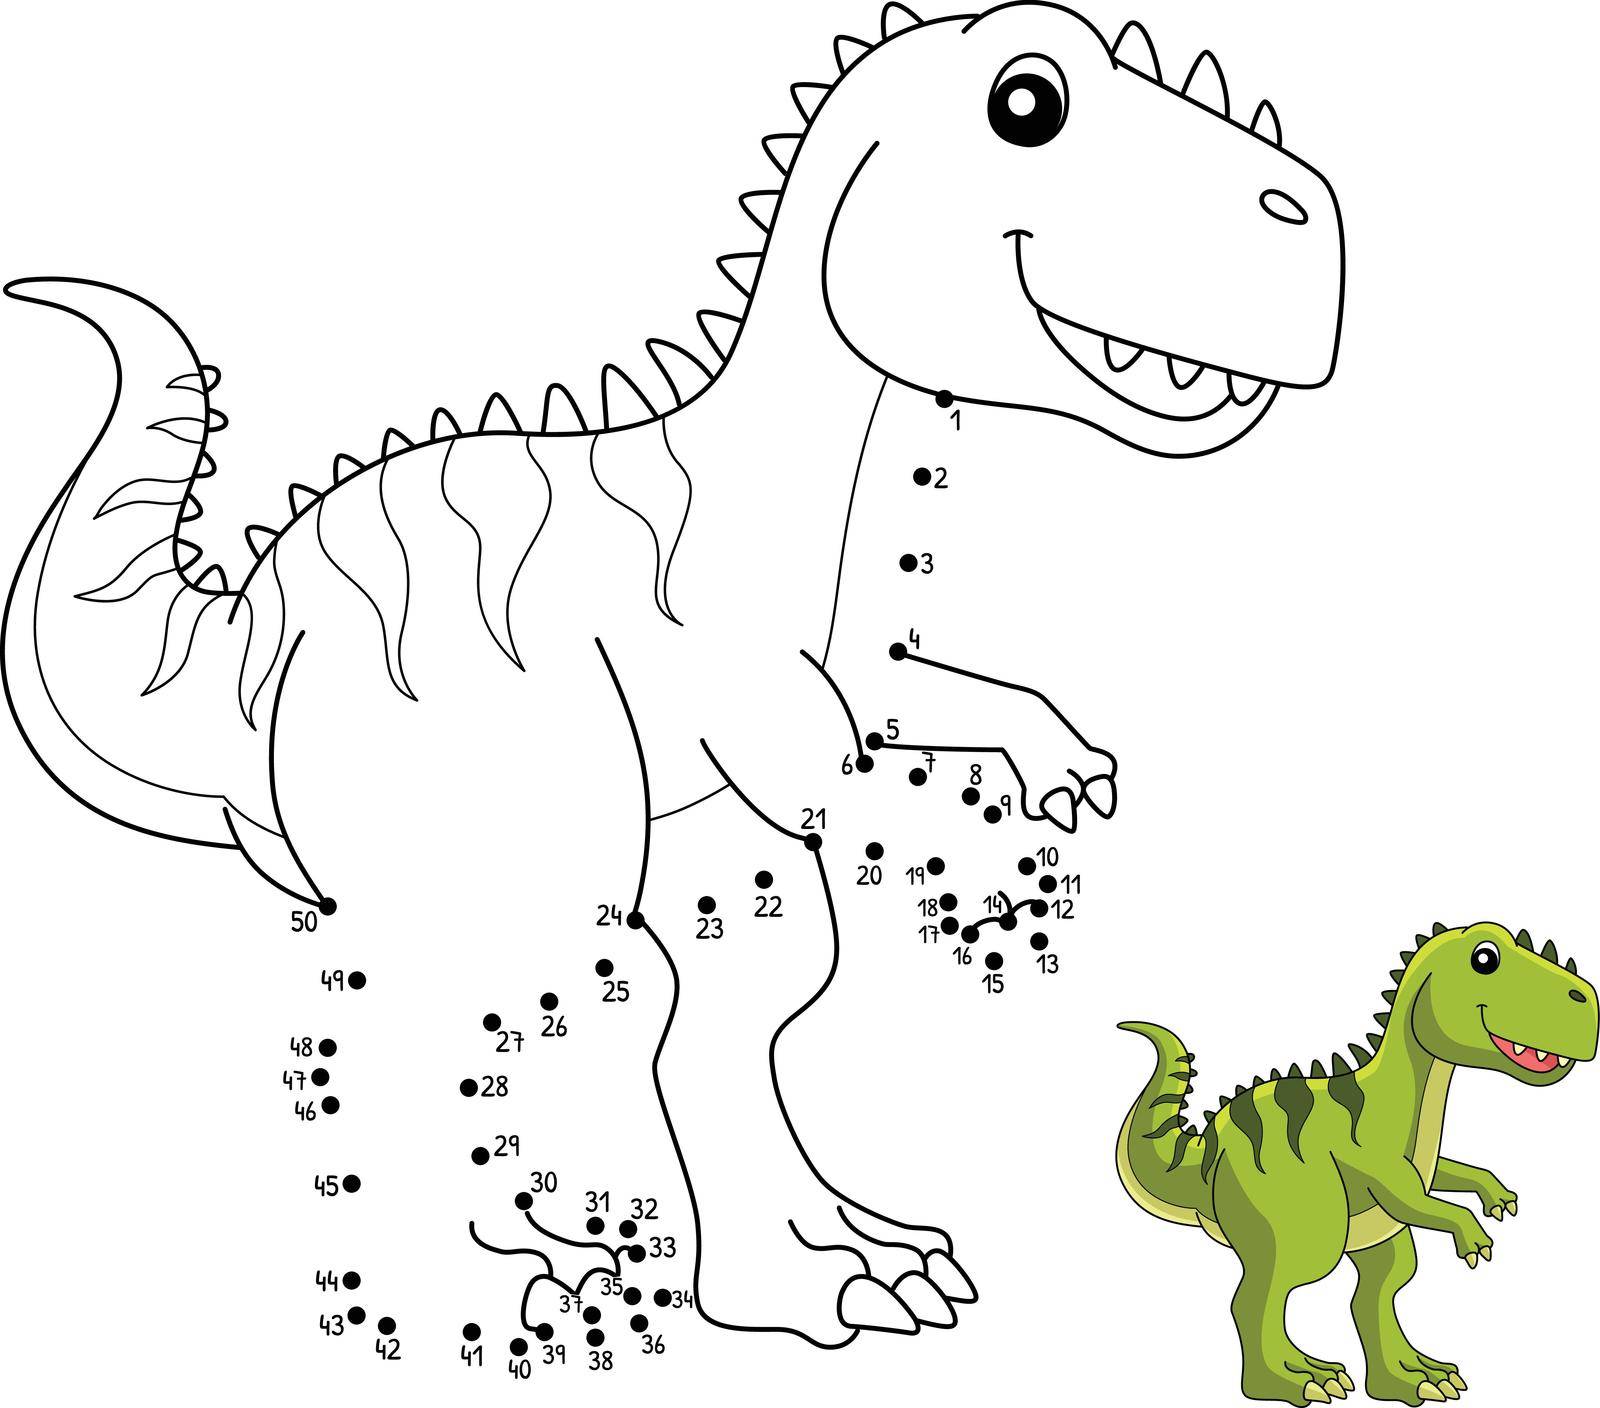 A cute and funny connect the dots coloring page of a Giganotosaurus. Provides hours of coloring fun for children. To color, this page is very easy. Suitable for little kids and toddlers.